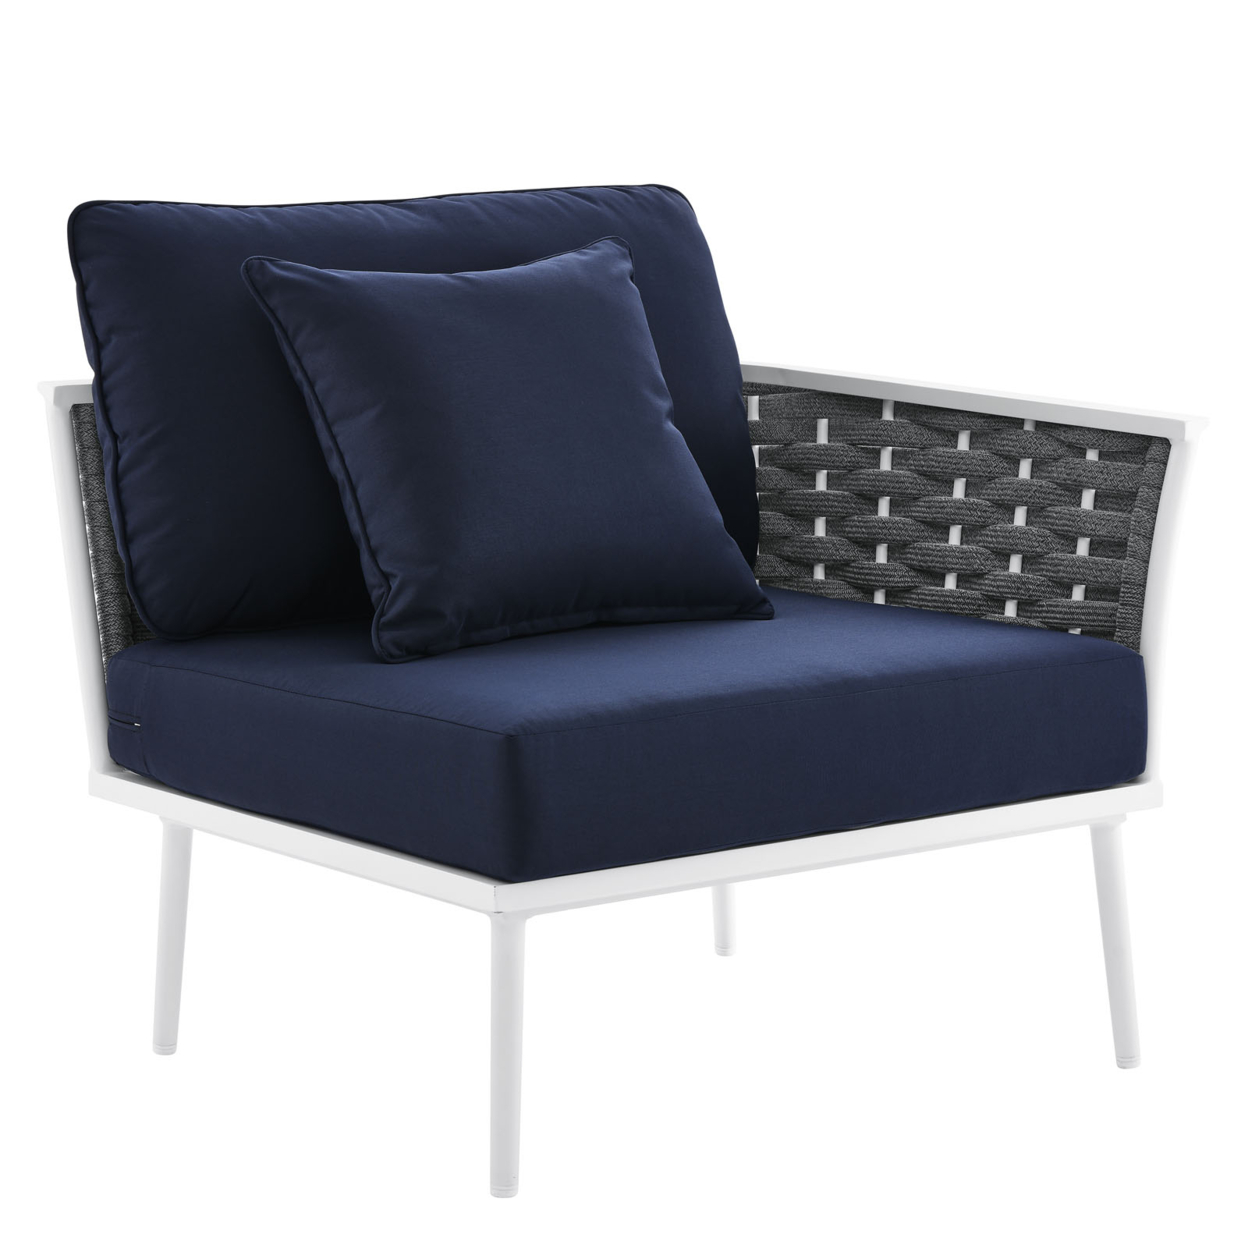 Stance Outdoor Patio Aluminum Right-Facing Armchair, White Navy